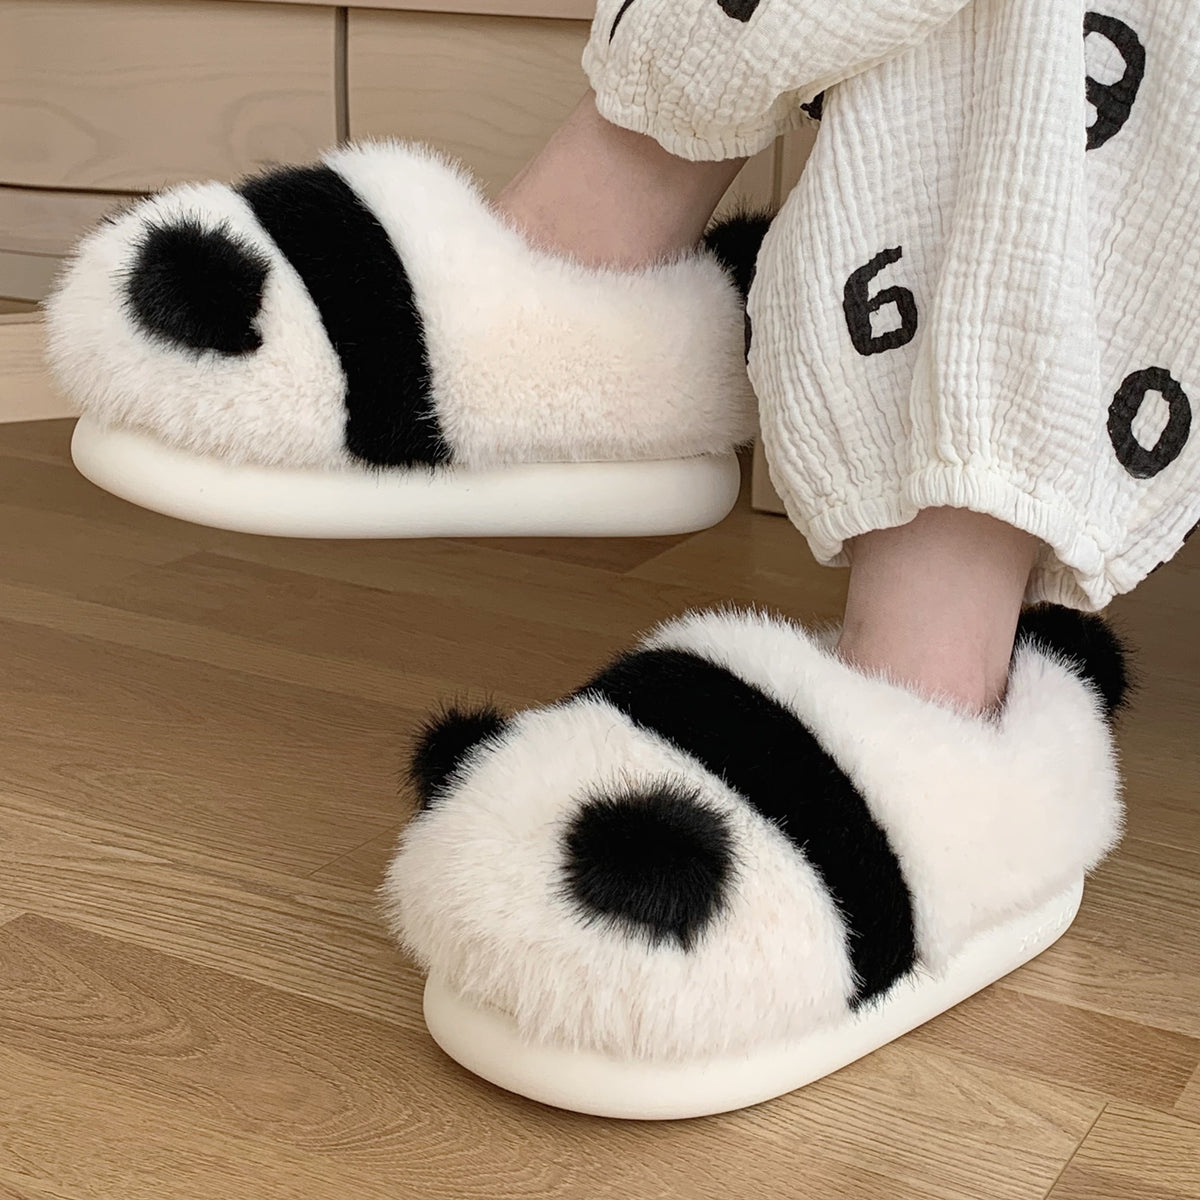 Panda Slippers - Black White Fluffy Animal Fuzzy Indoor Bedroom Shoes, Adult – ShoeWee